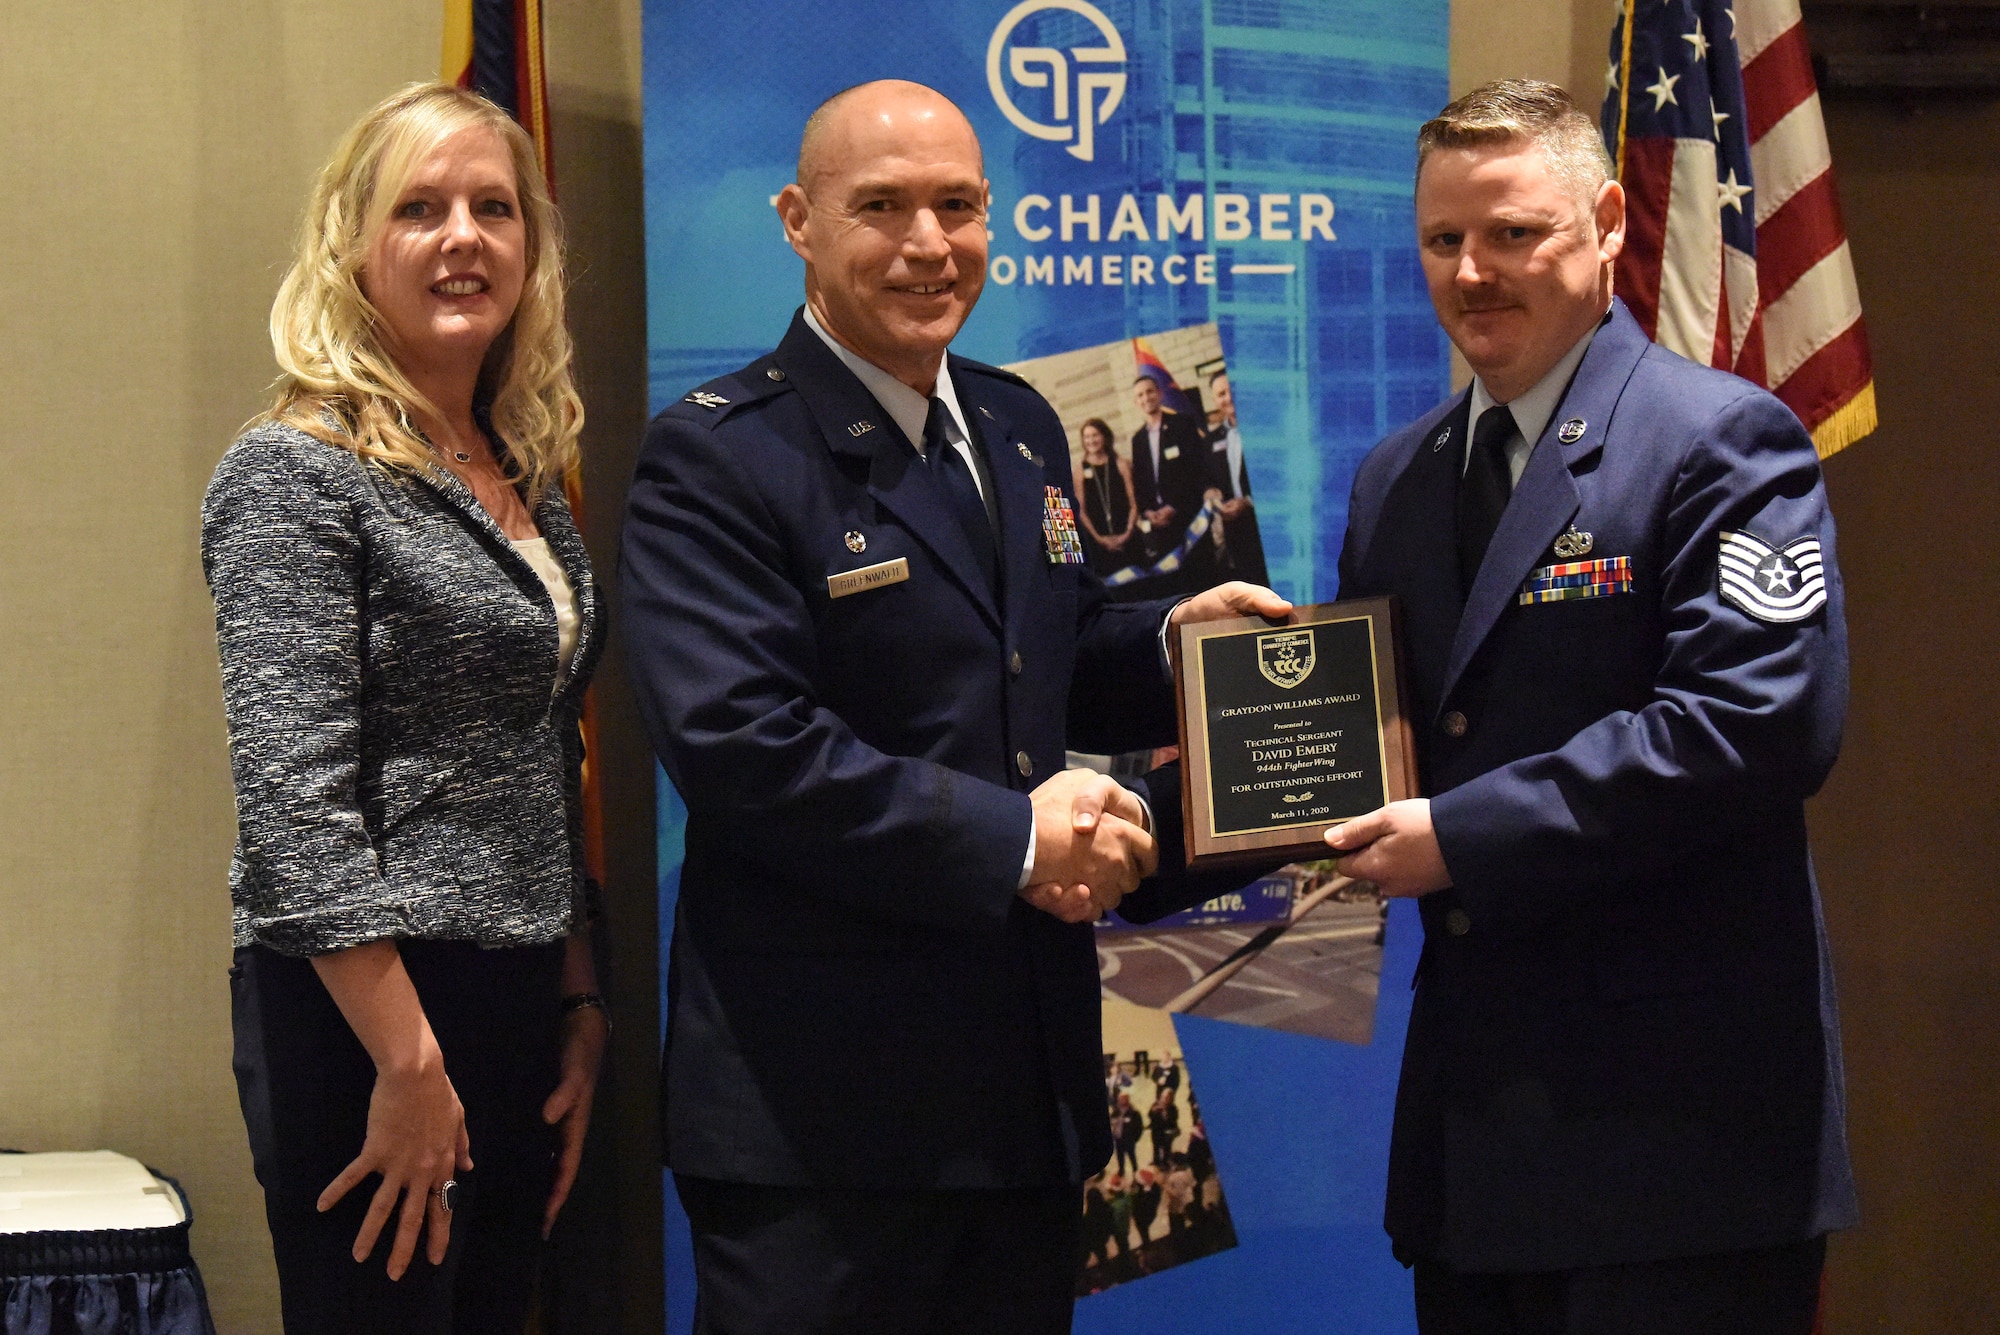 This year’s annual presentation of the Graydon Williams award was received by Tech. Sgt. David R. Emery, 414th Maintenance Squadron quality assurance inspector, Seymour Johnson Air Force Base, N.C.